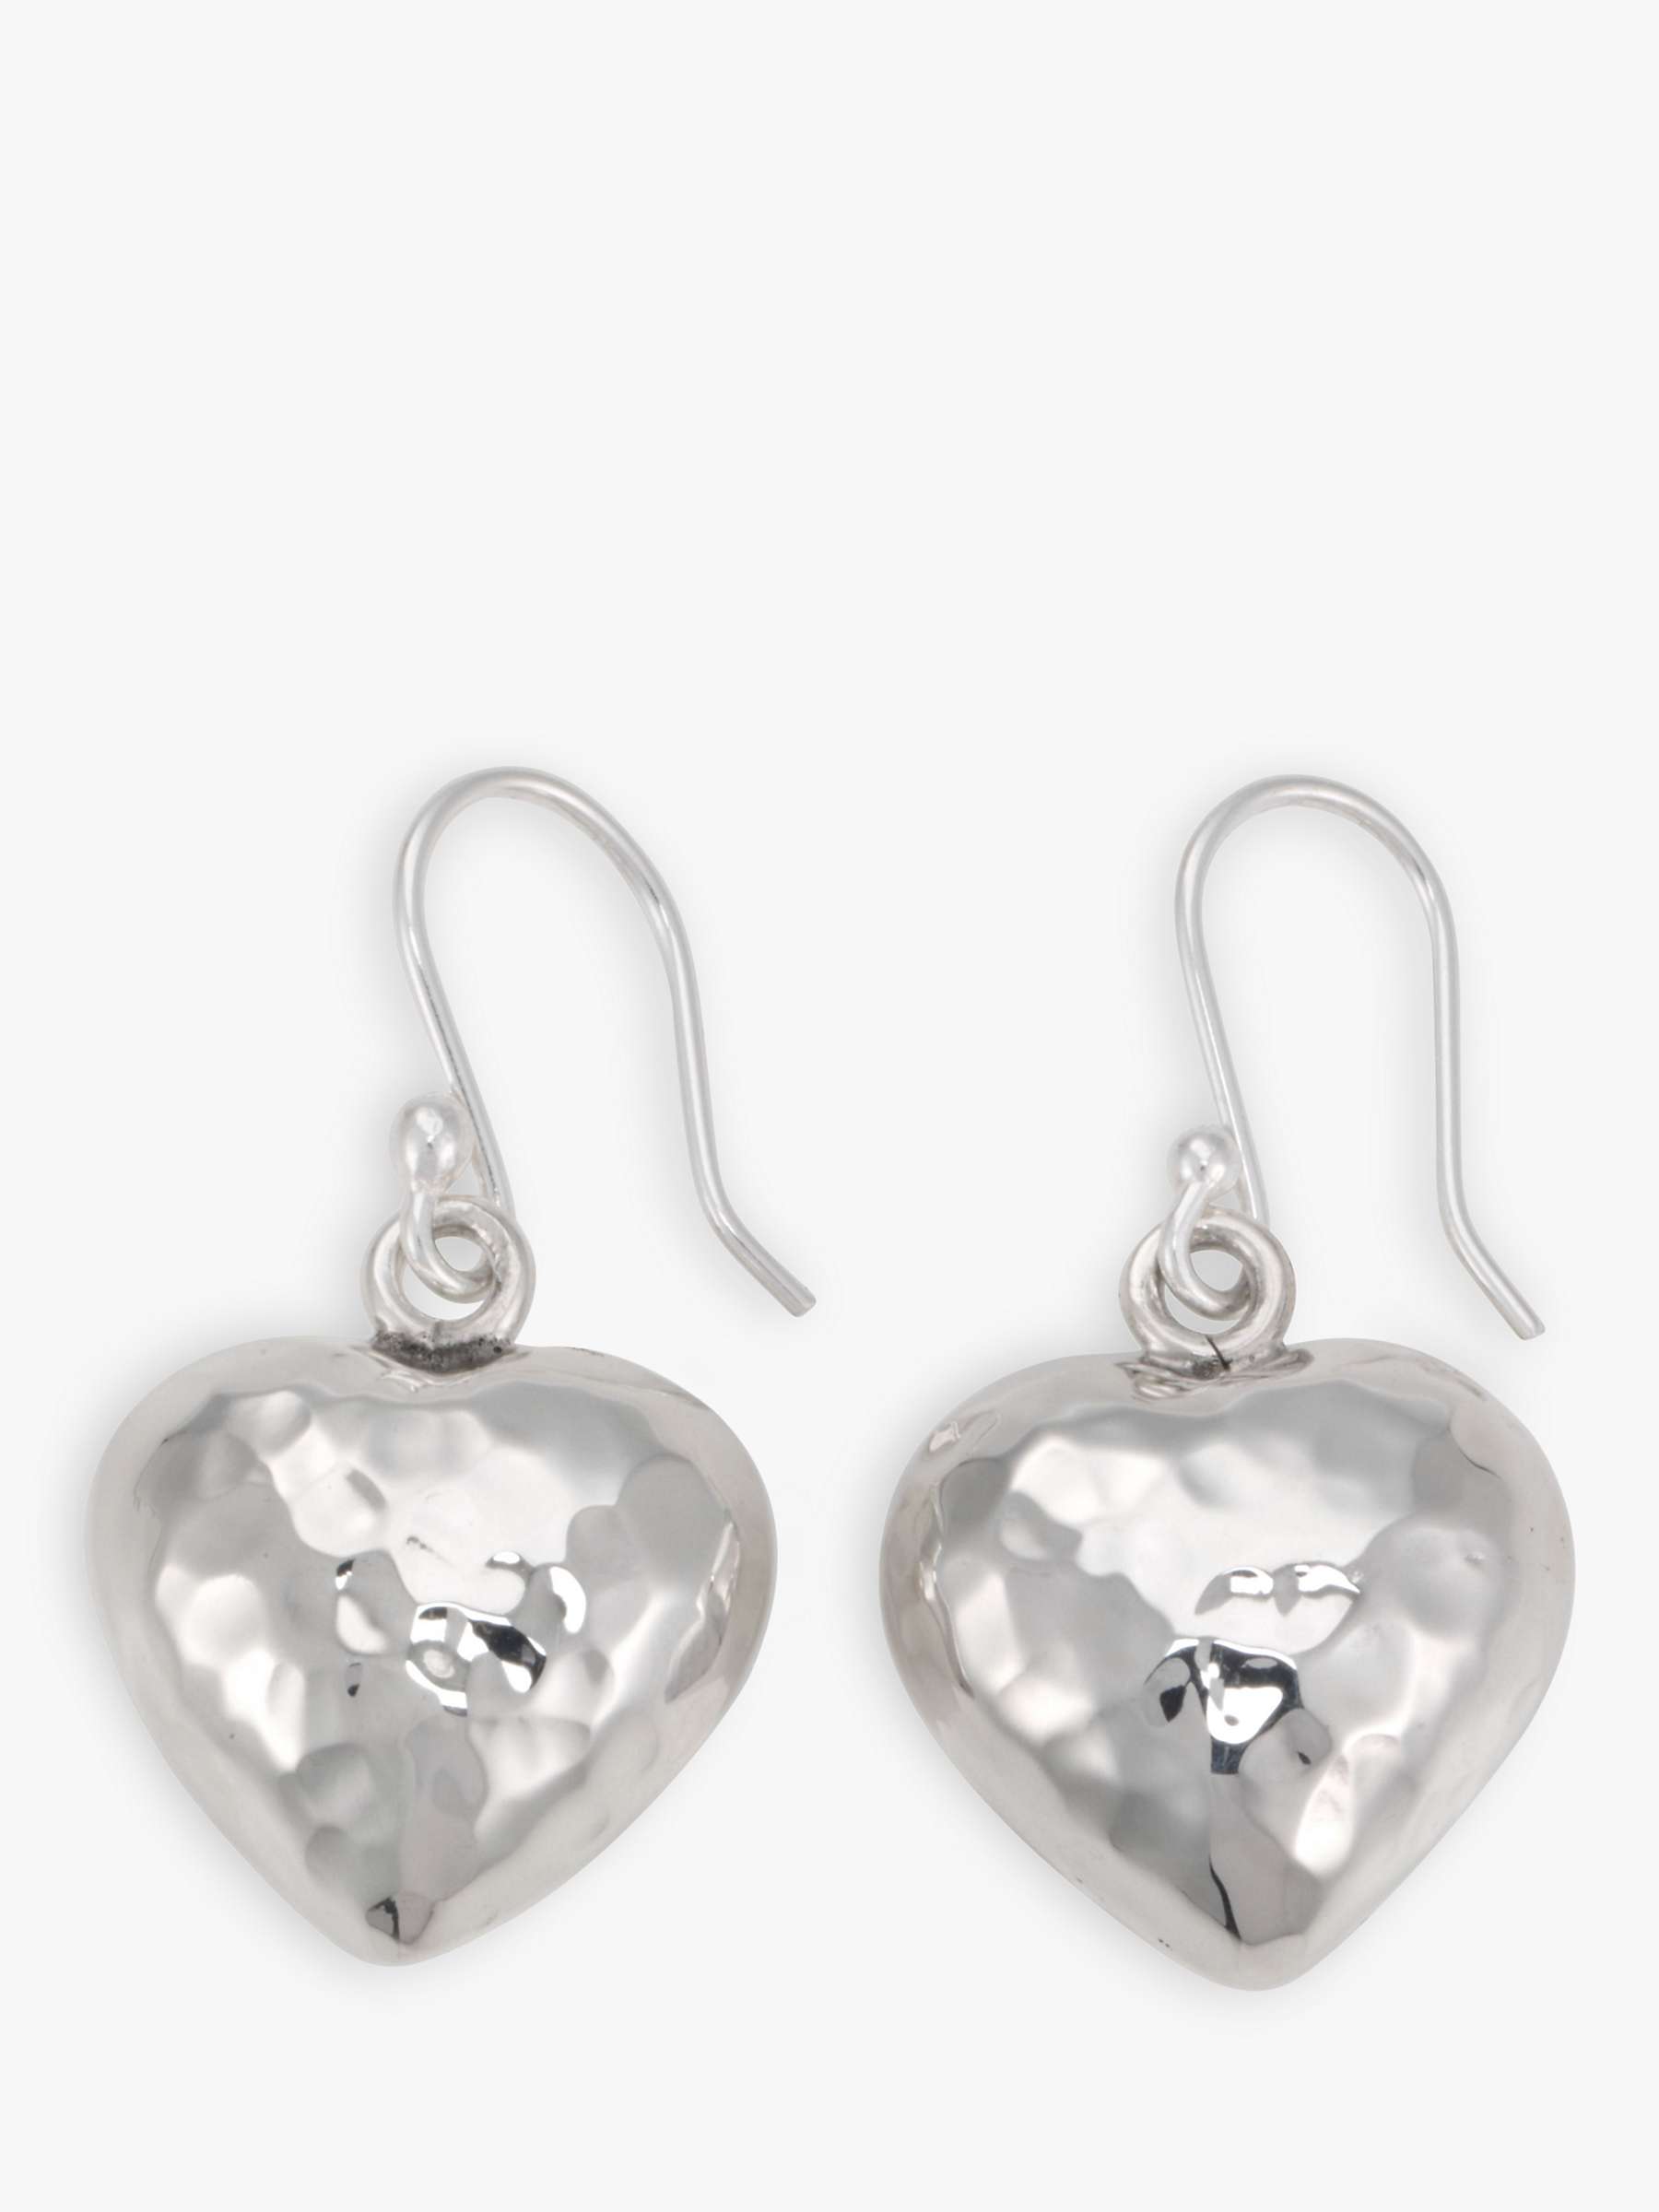 Buy Andea Hammered Puffed Heart Drop Earrings, Silver Online at johnlewis.com